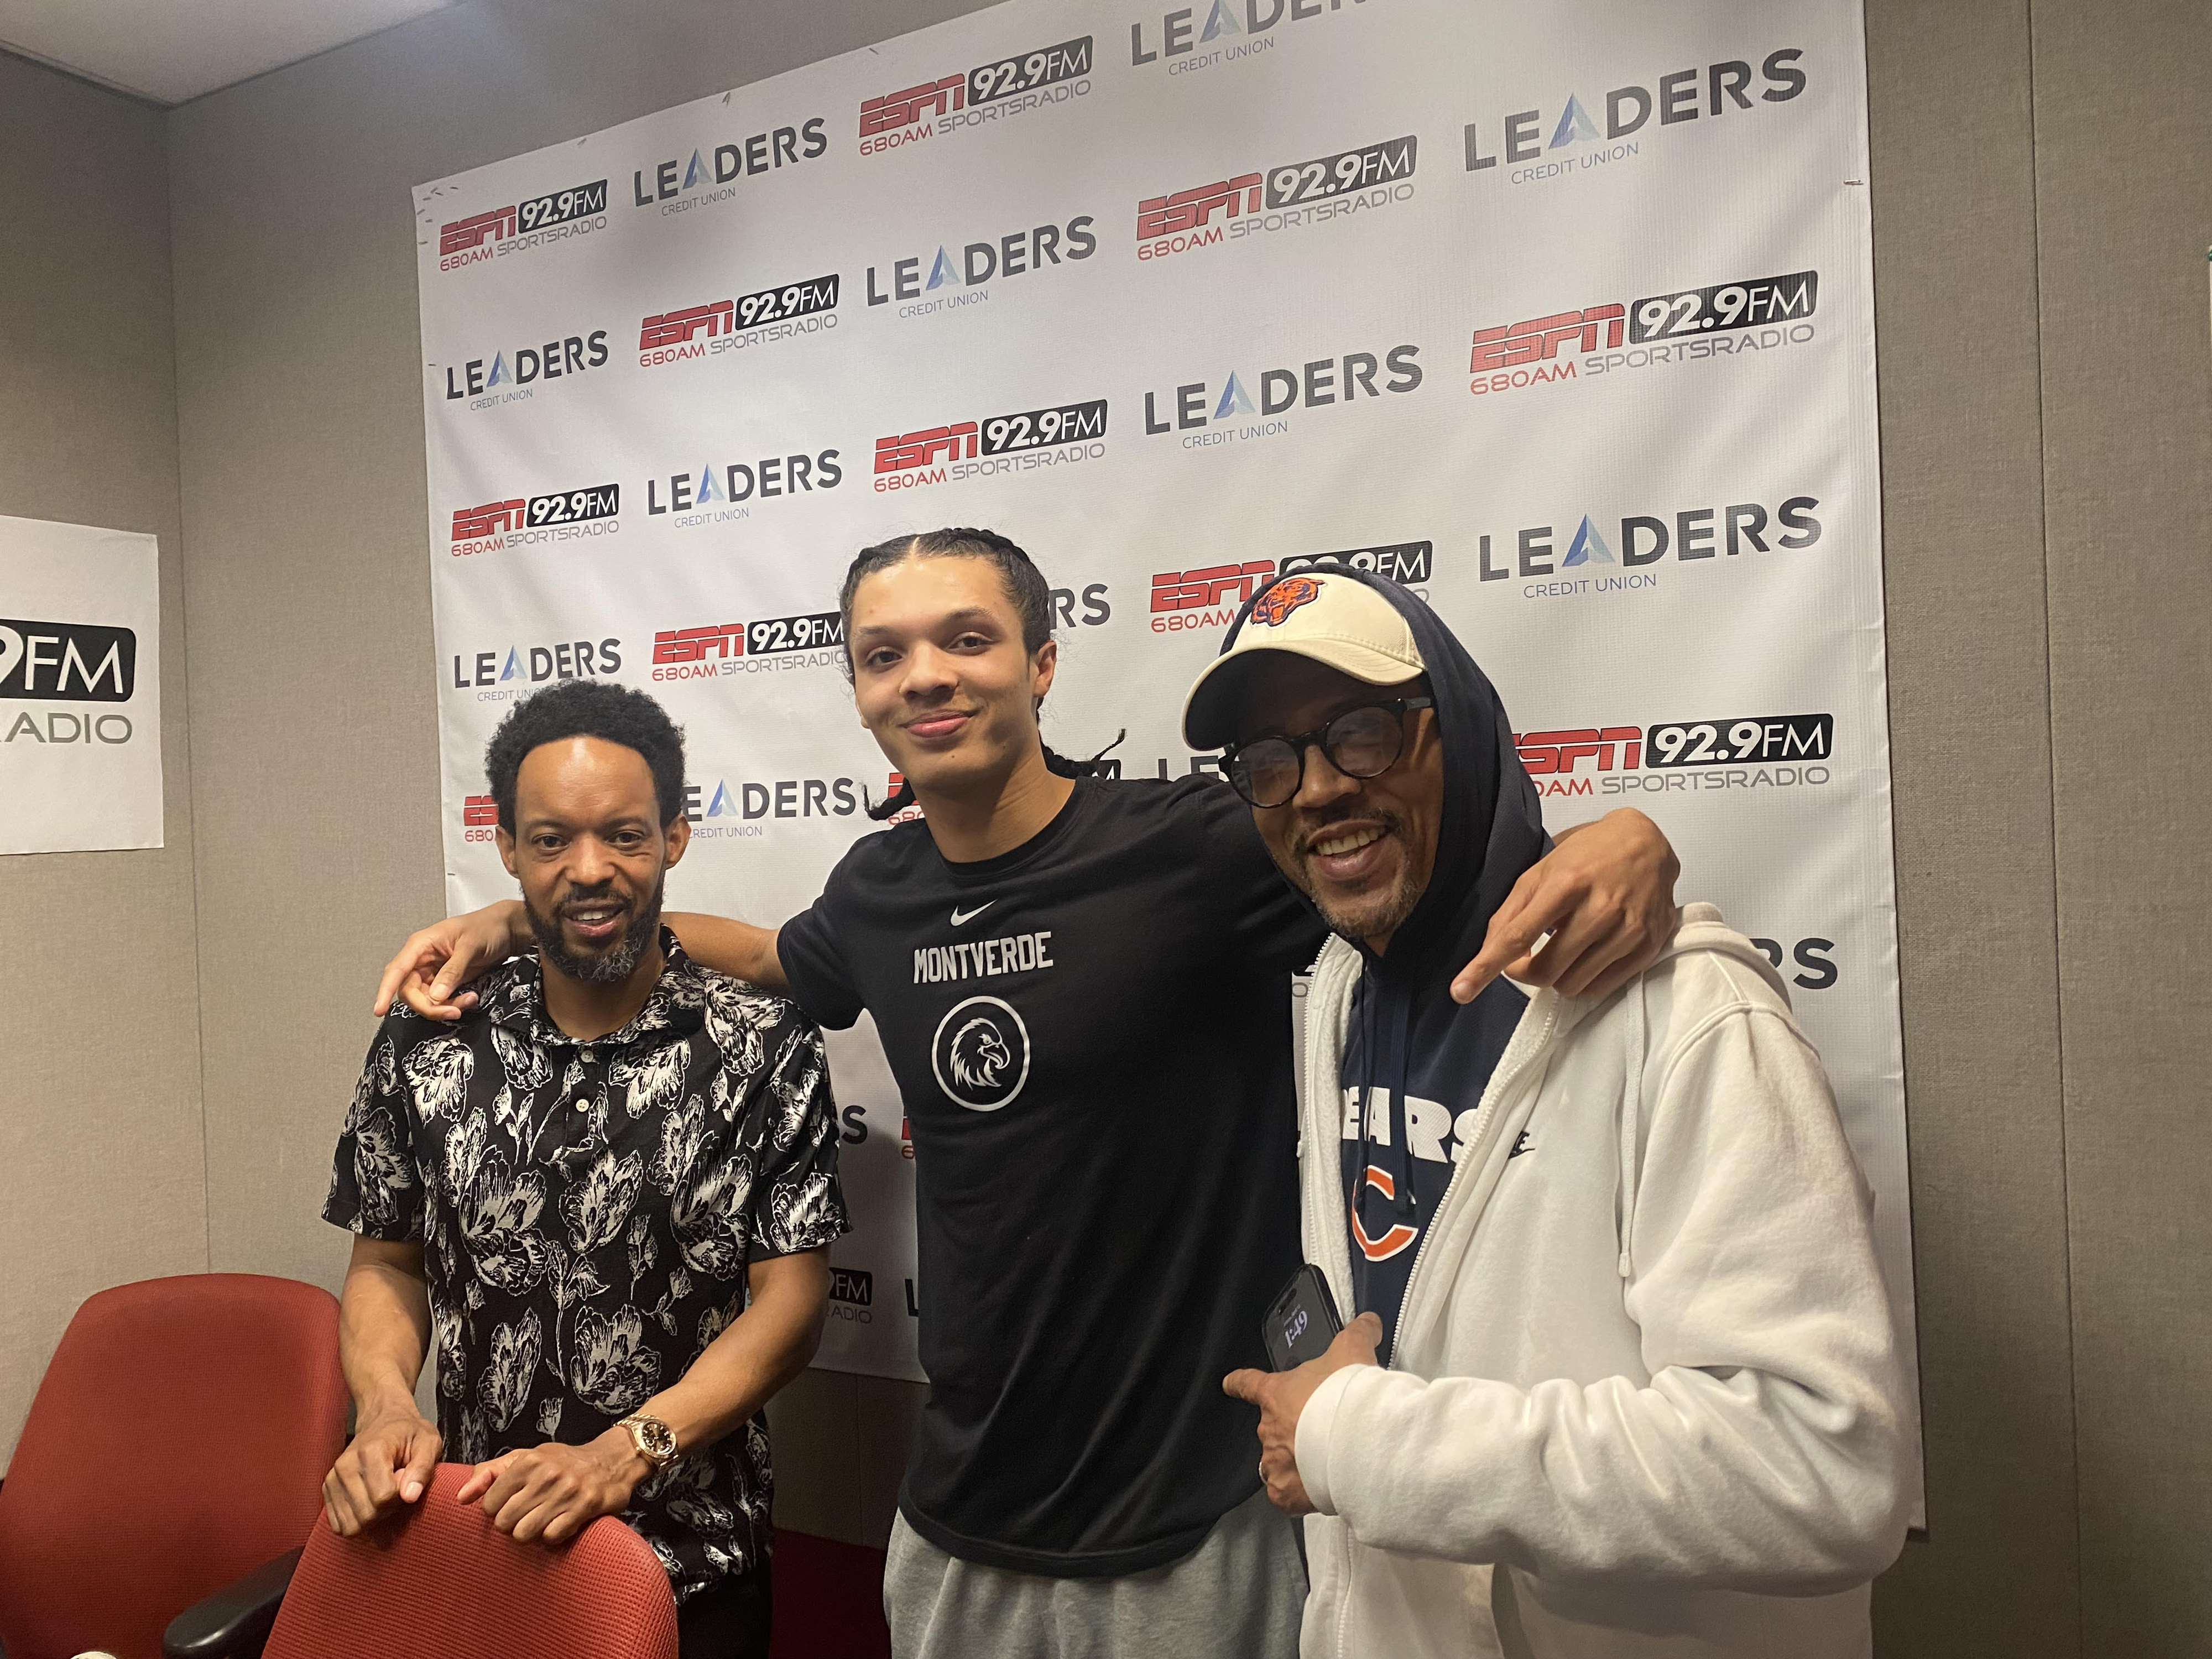 Monteverde National Champion/LSU's Curtis Givens III w/his father Curtis Givens and Jason Smith in-studio